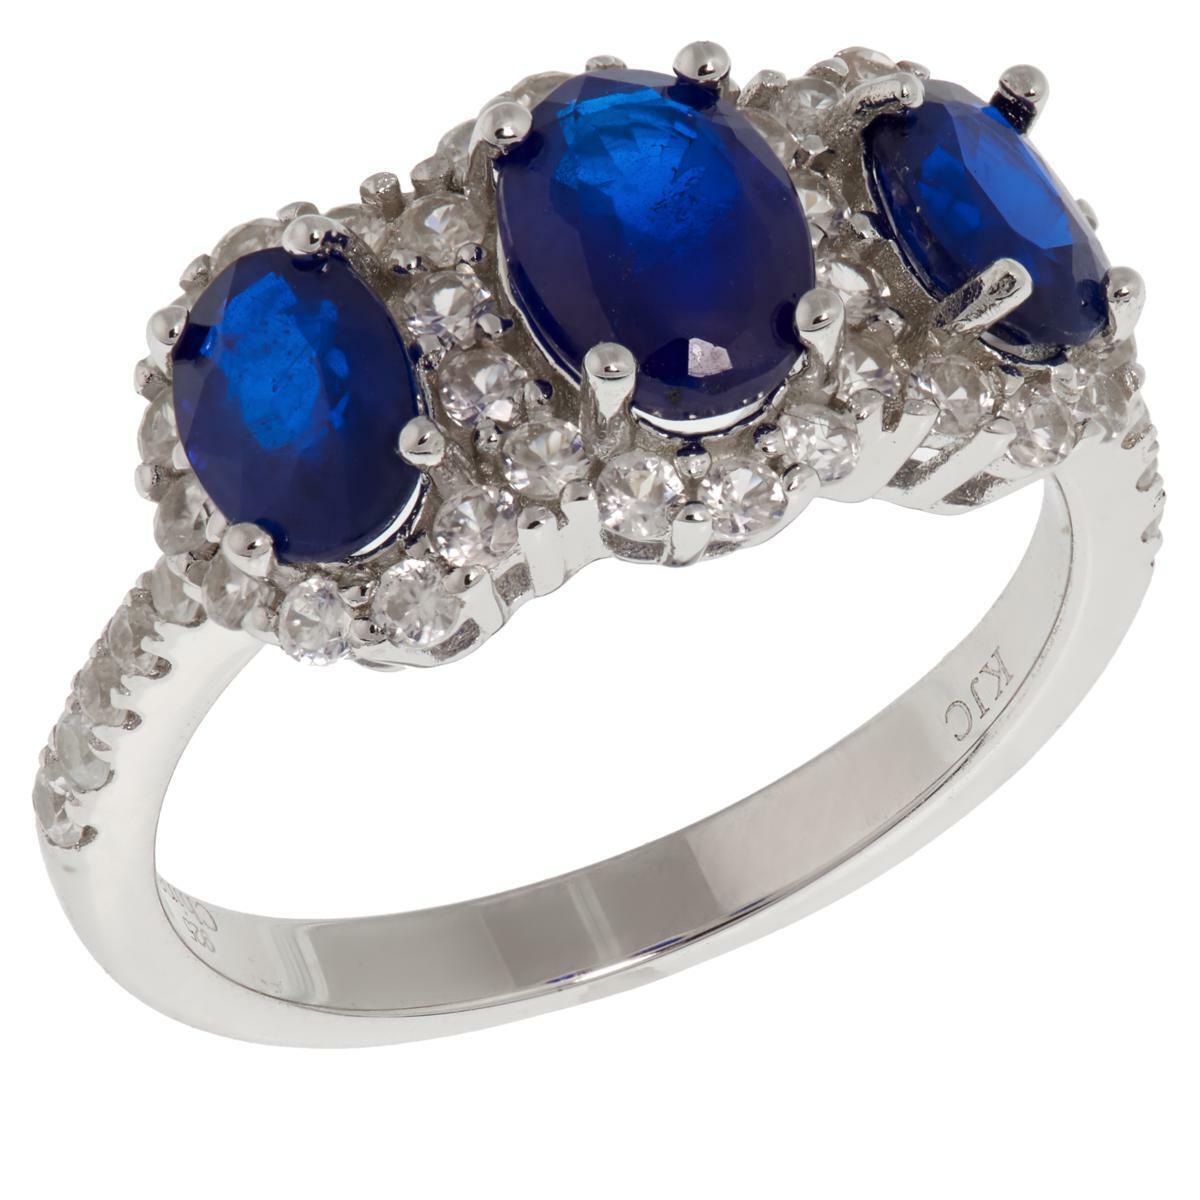 Colleen Lopez 1.53Ctw Blue Spinel & White Zircon 3-Stone Ring Size 6 Hsn $200